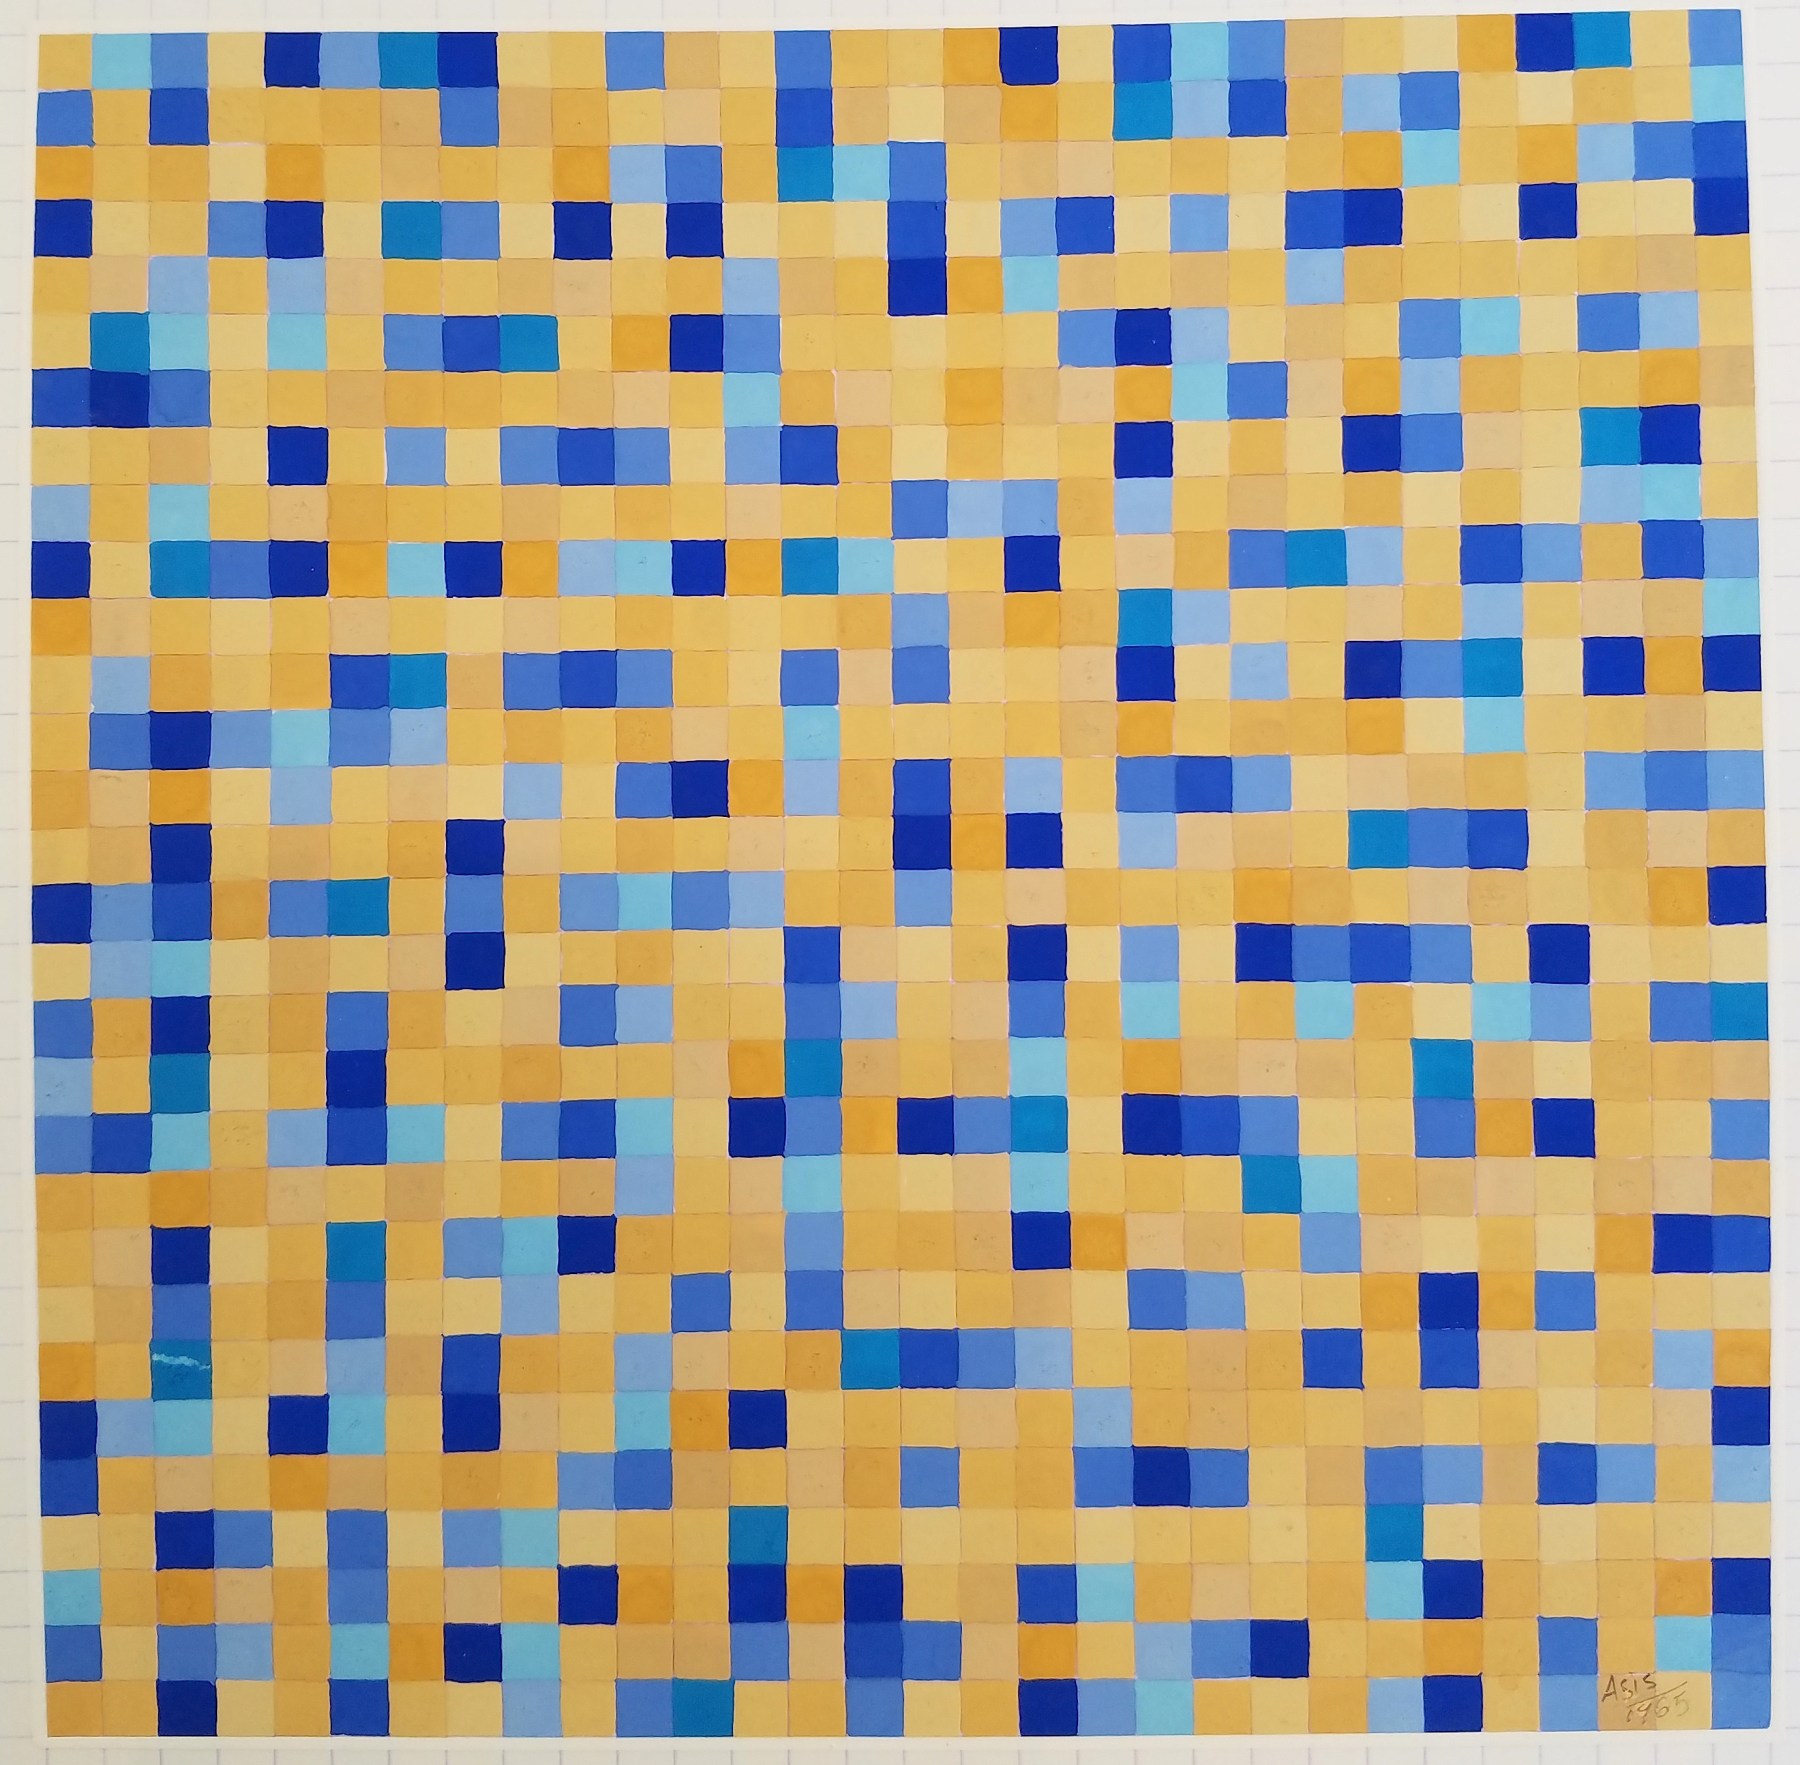 Antonio Asis,&nbsp;Untitled from the series Chromatisme Quadrill&eacute; Polychrome, 1965, Gouache on paper,&nbsp;11 3/4 x 8 3/8 in. (29.8 x 21.2 cm.)